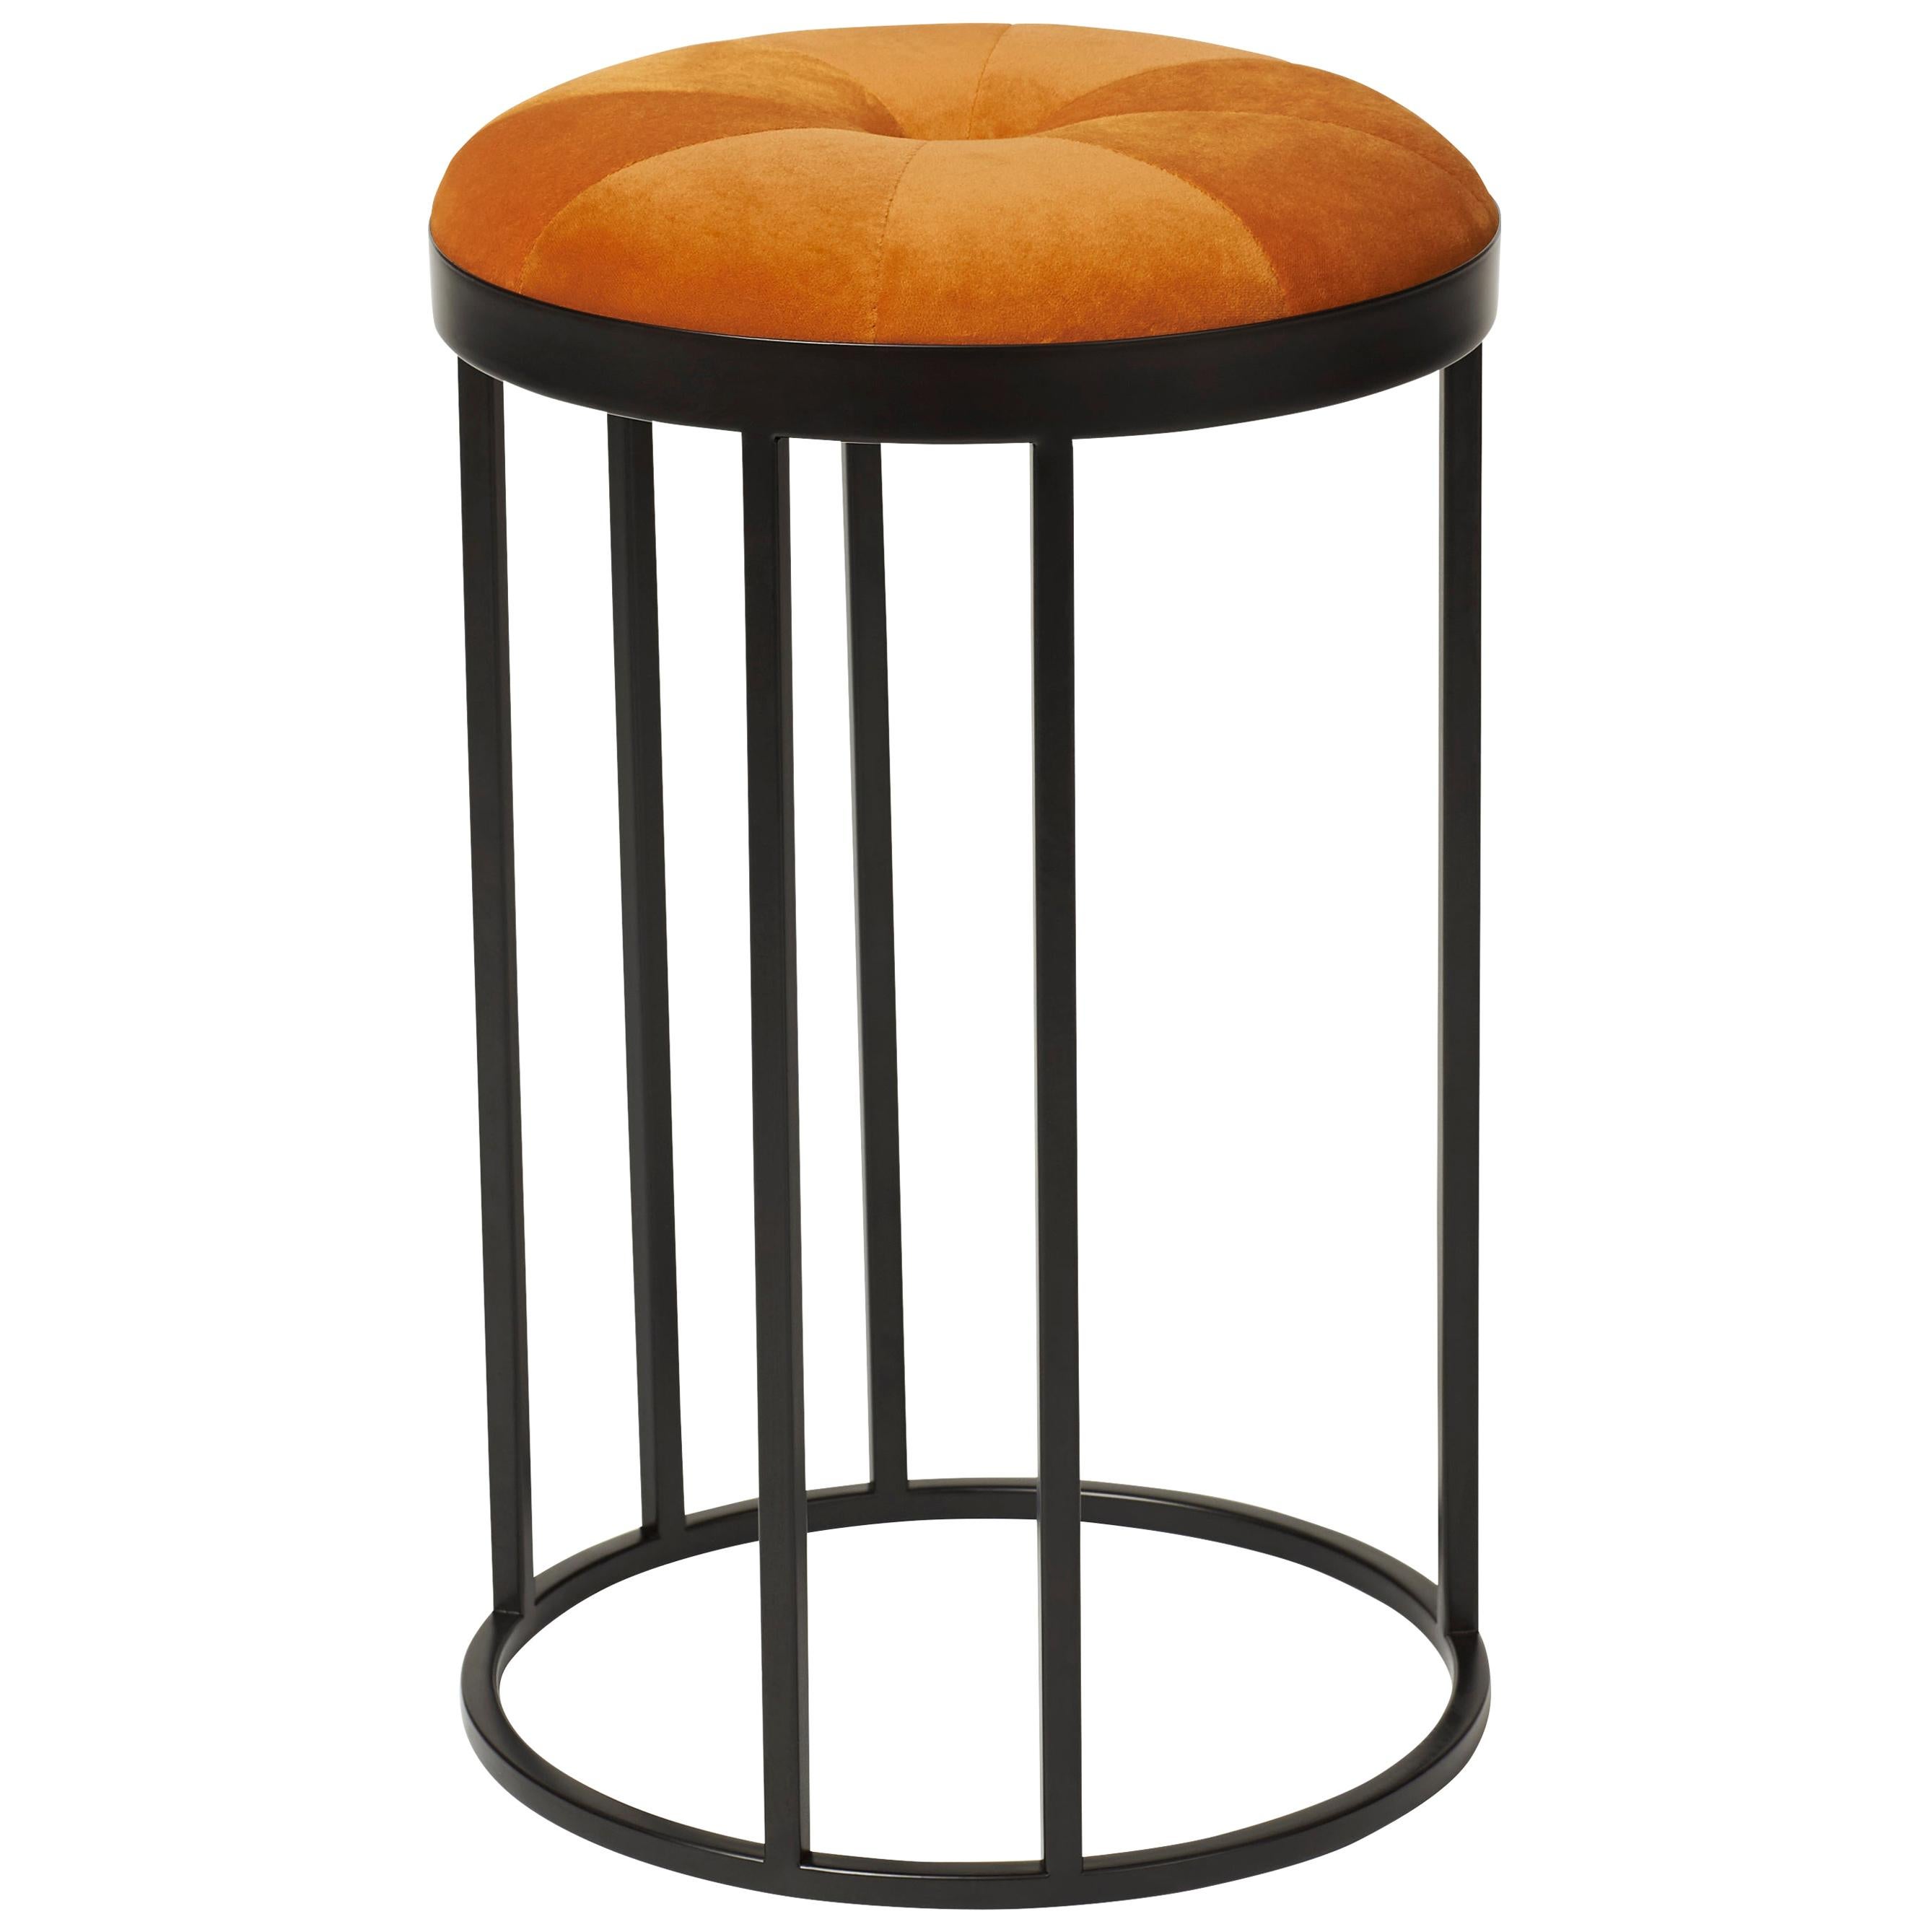 For Sale: Brown (Amber) Daisy Stool, by Sabine Stougaard from Warm Nordic